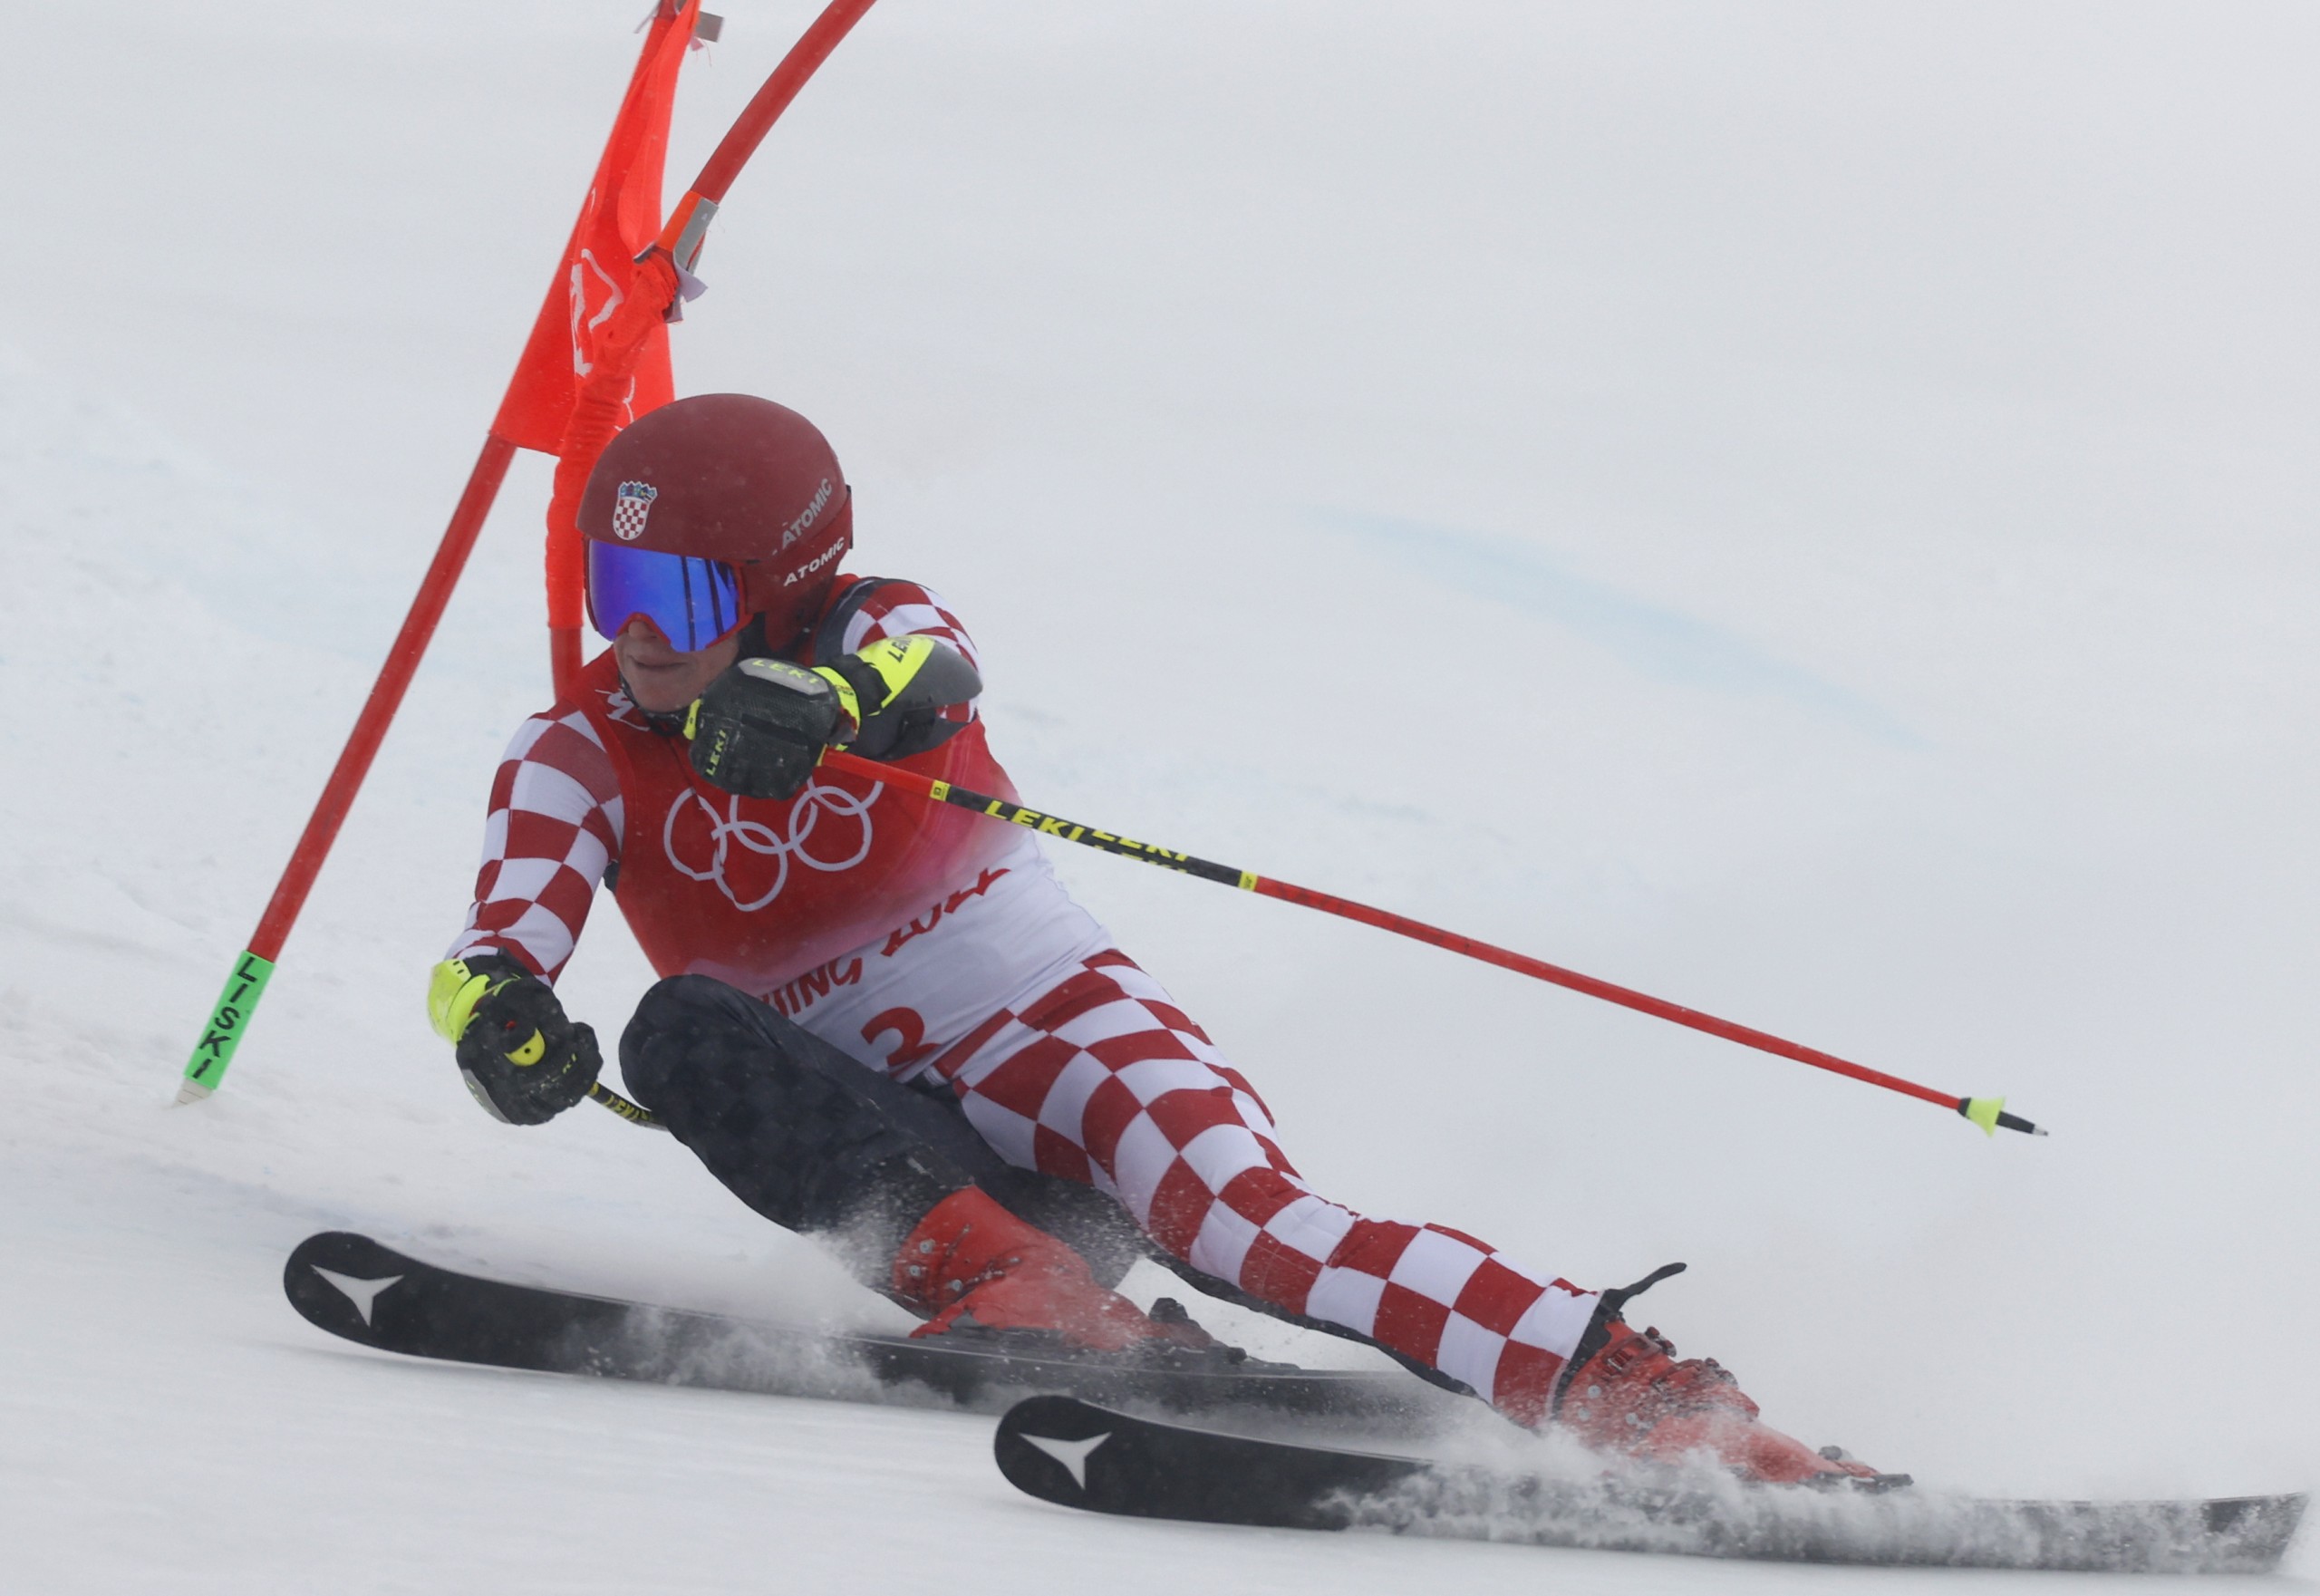 epa09751634 Filip Zubcic of Croatia clears a gate during the second run of the Men's Giant Slalom race of the Alpine Skiing events of the Beijing 2022 Olympic Games at the Yanqing National Alpine Ski Centre Skiing, Beijing municipality, China, 13 February 2022.  EPA/GUILLAUME HORCAJUELO